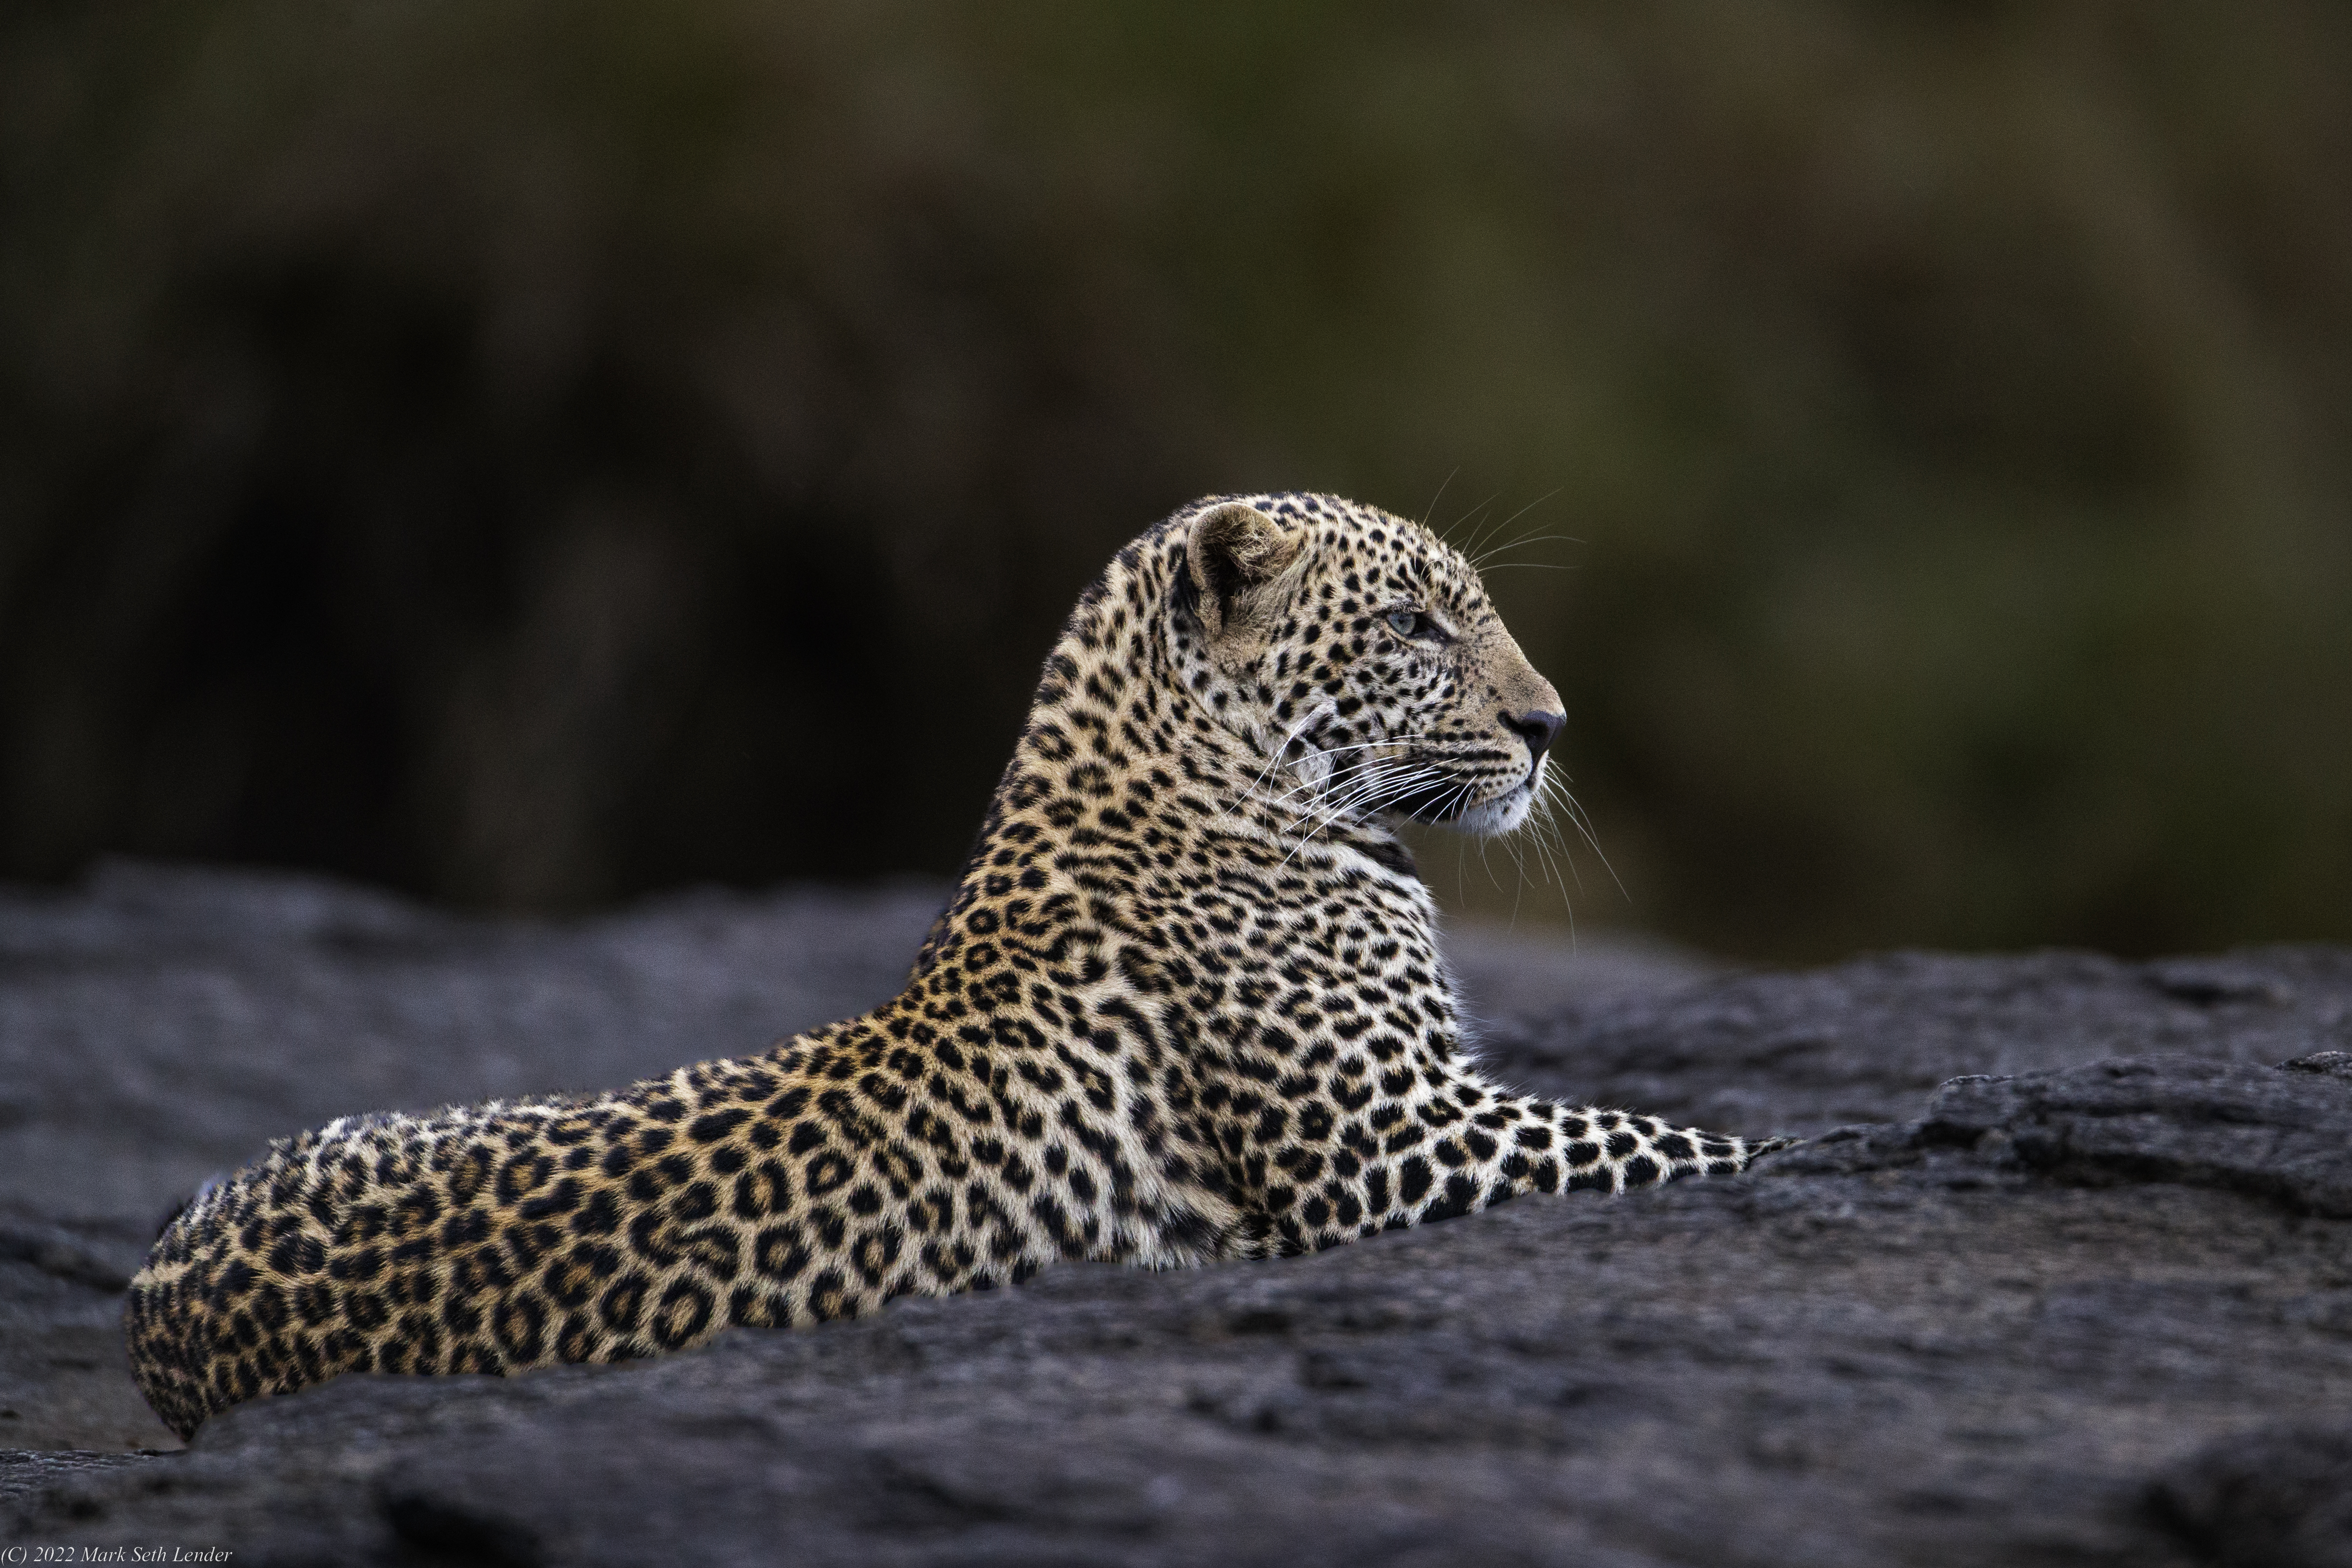 Living on Earth: Field Note: Wishful Thinking - Leopards of the